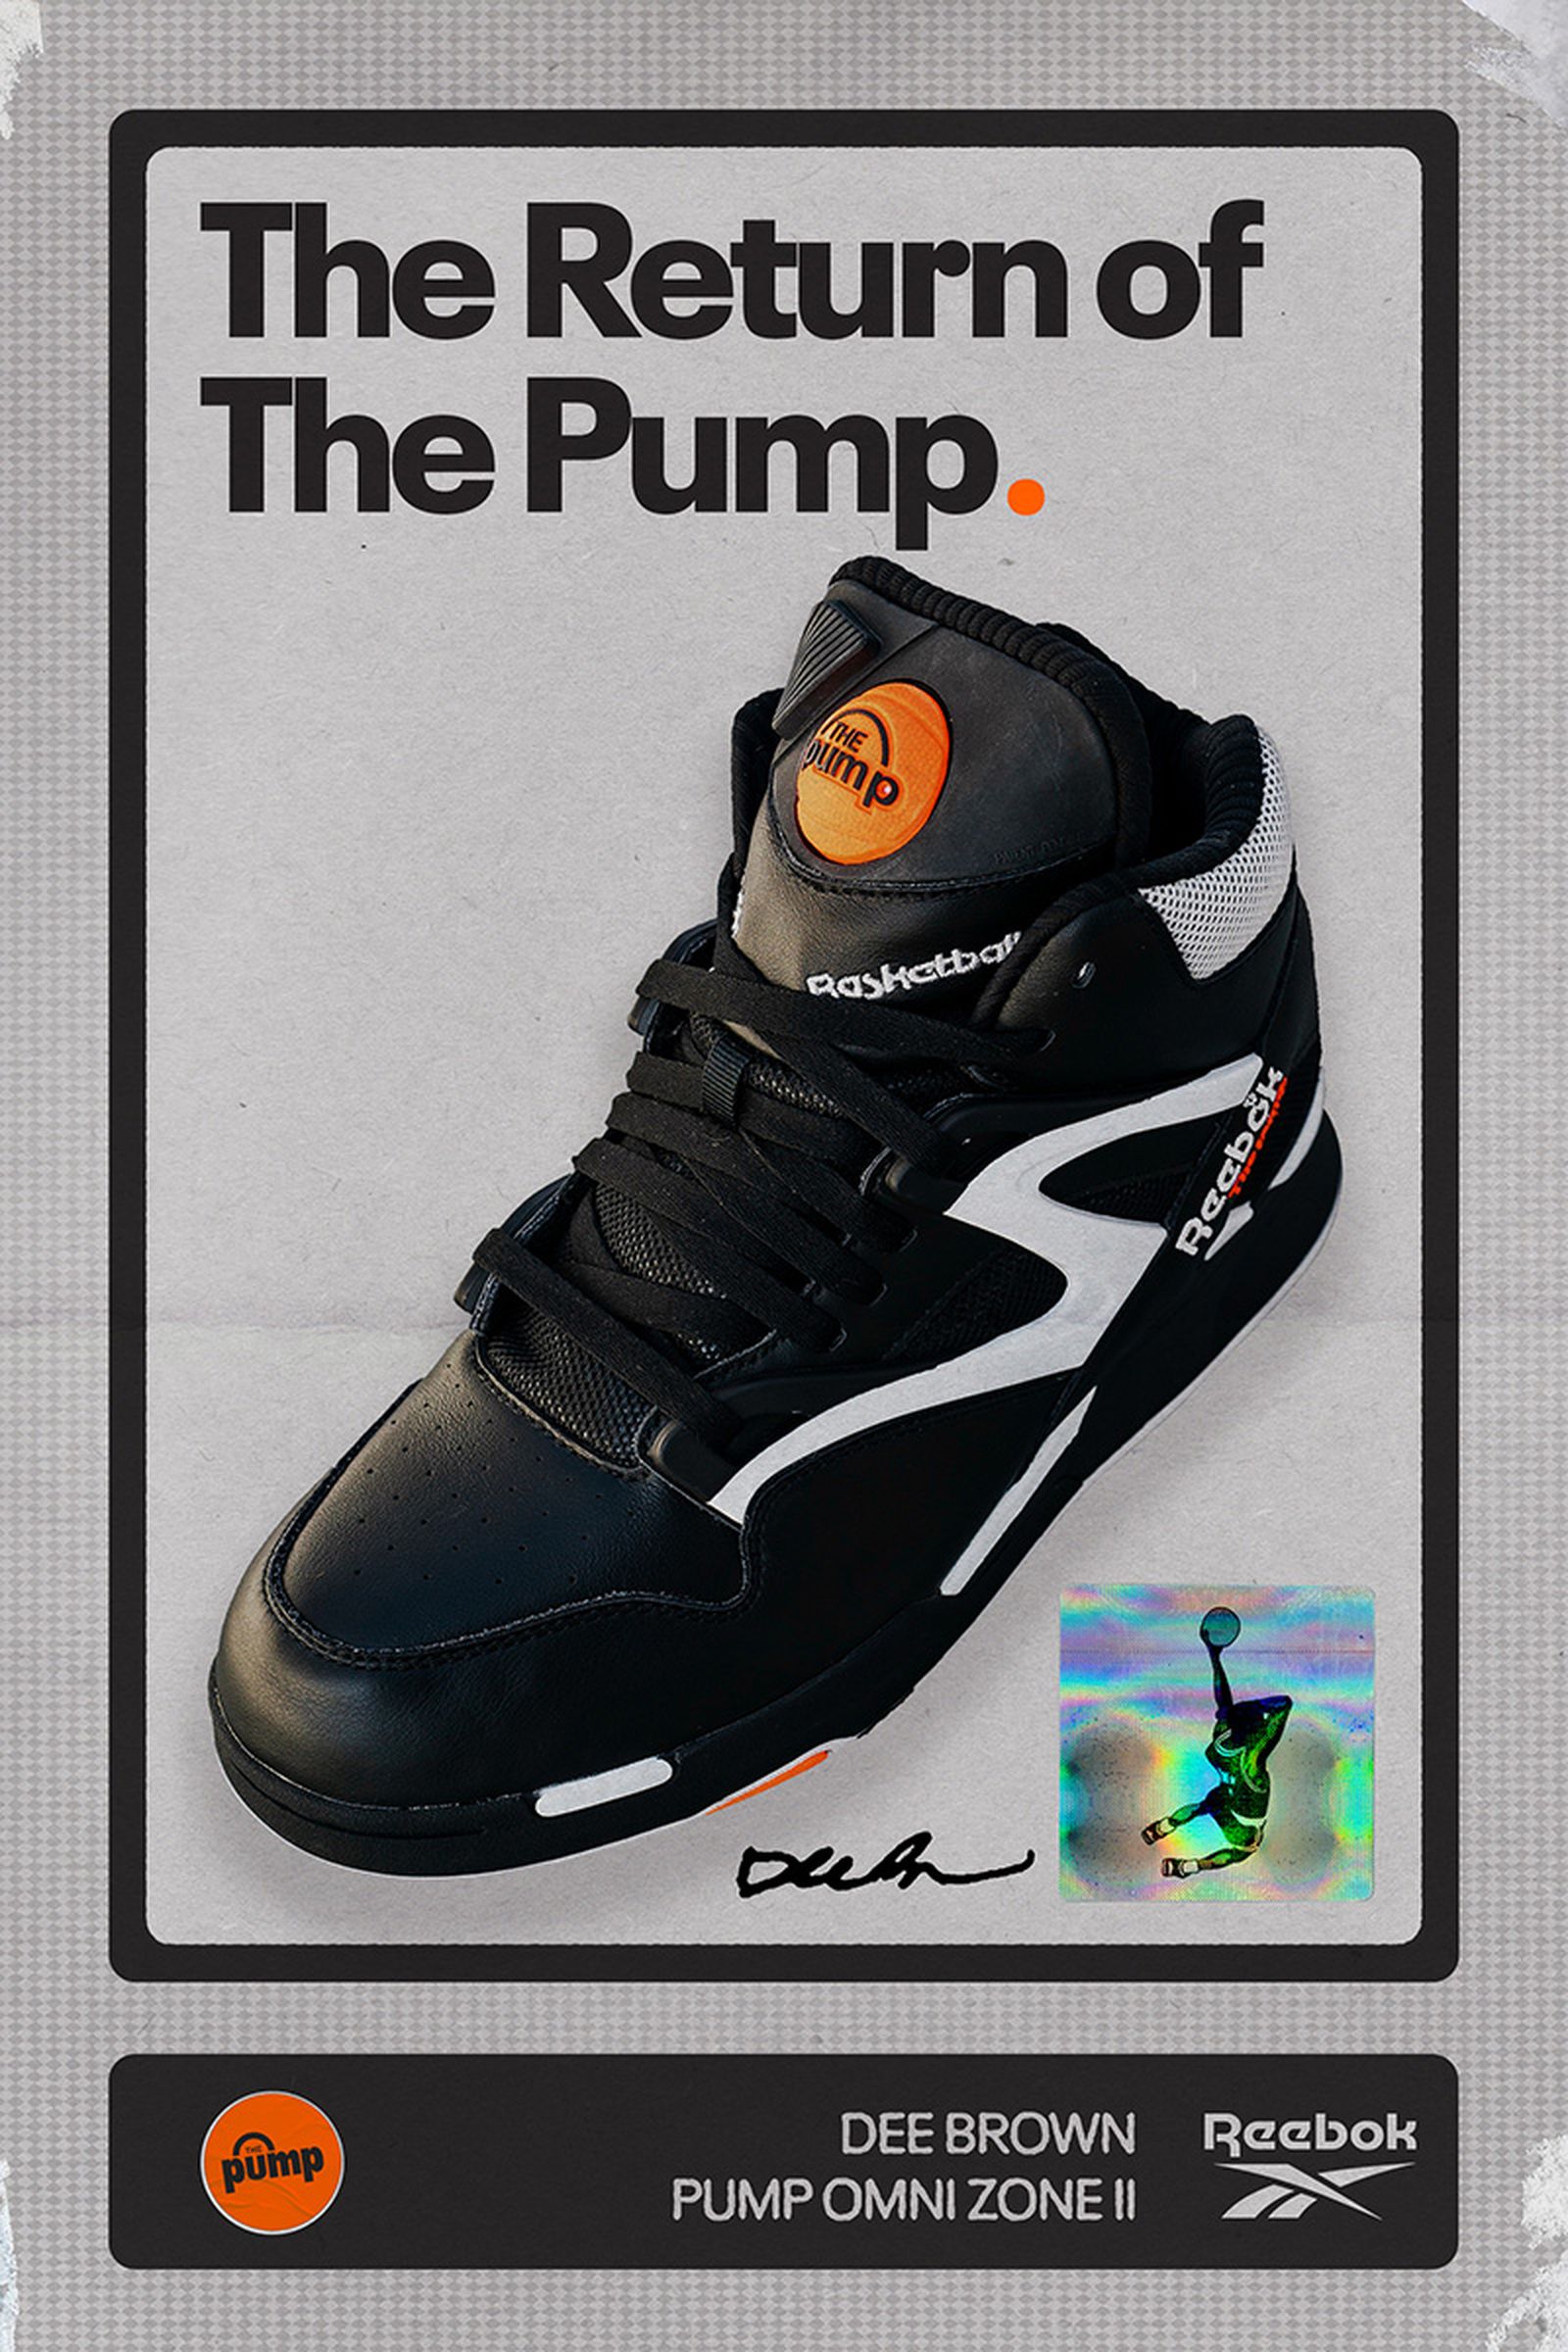 What Year Did Reebok Pumps Come Out?